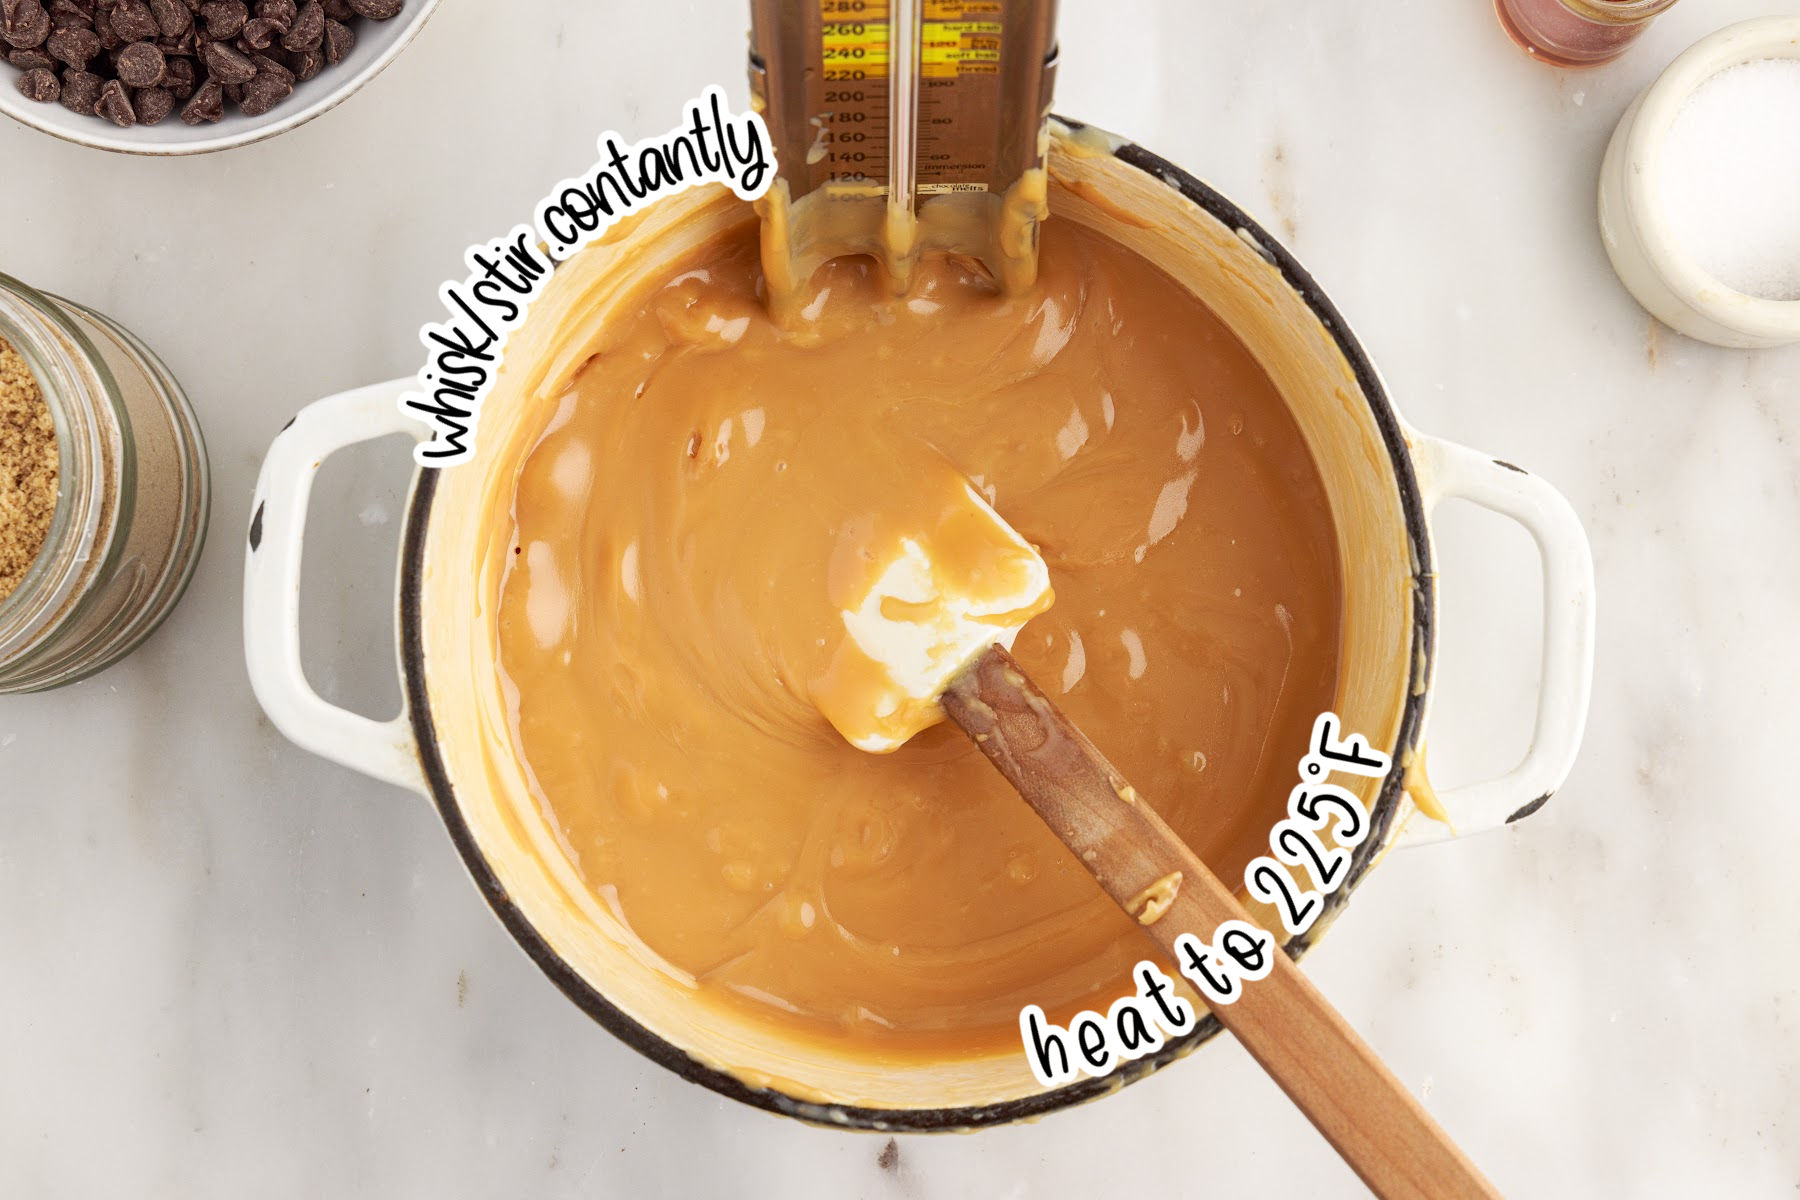 Spatula in saucepan with caramel sauce, candy thermometer, and text "whisk/stir constantly" and "heat to 225°F"